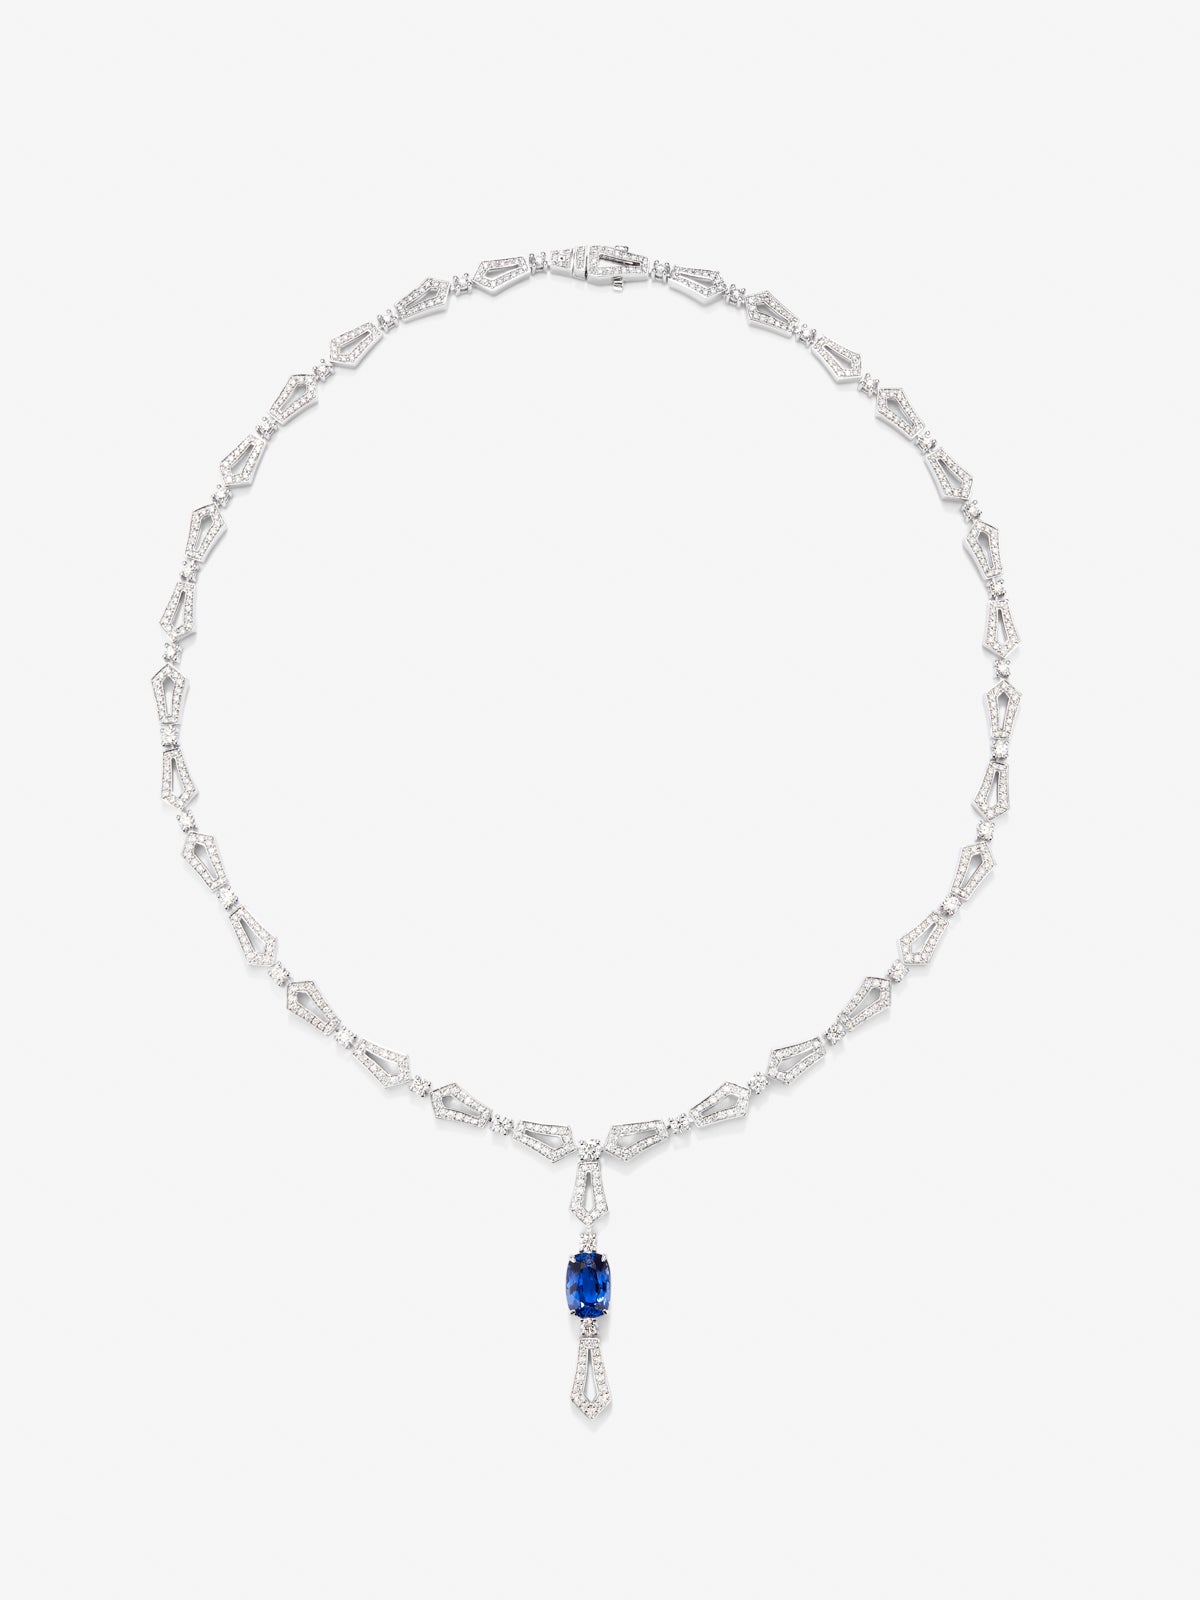 18K white gold necklace with blue sapphire in 3.17 cts and white diamonds in bright 4.13 cts diamonds